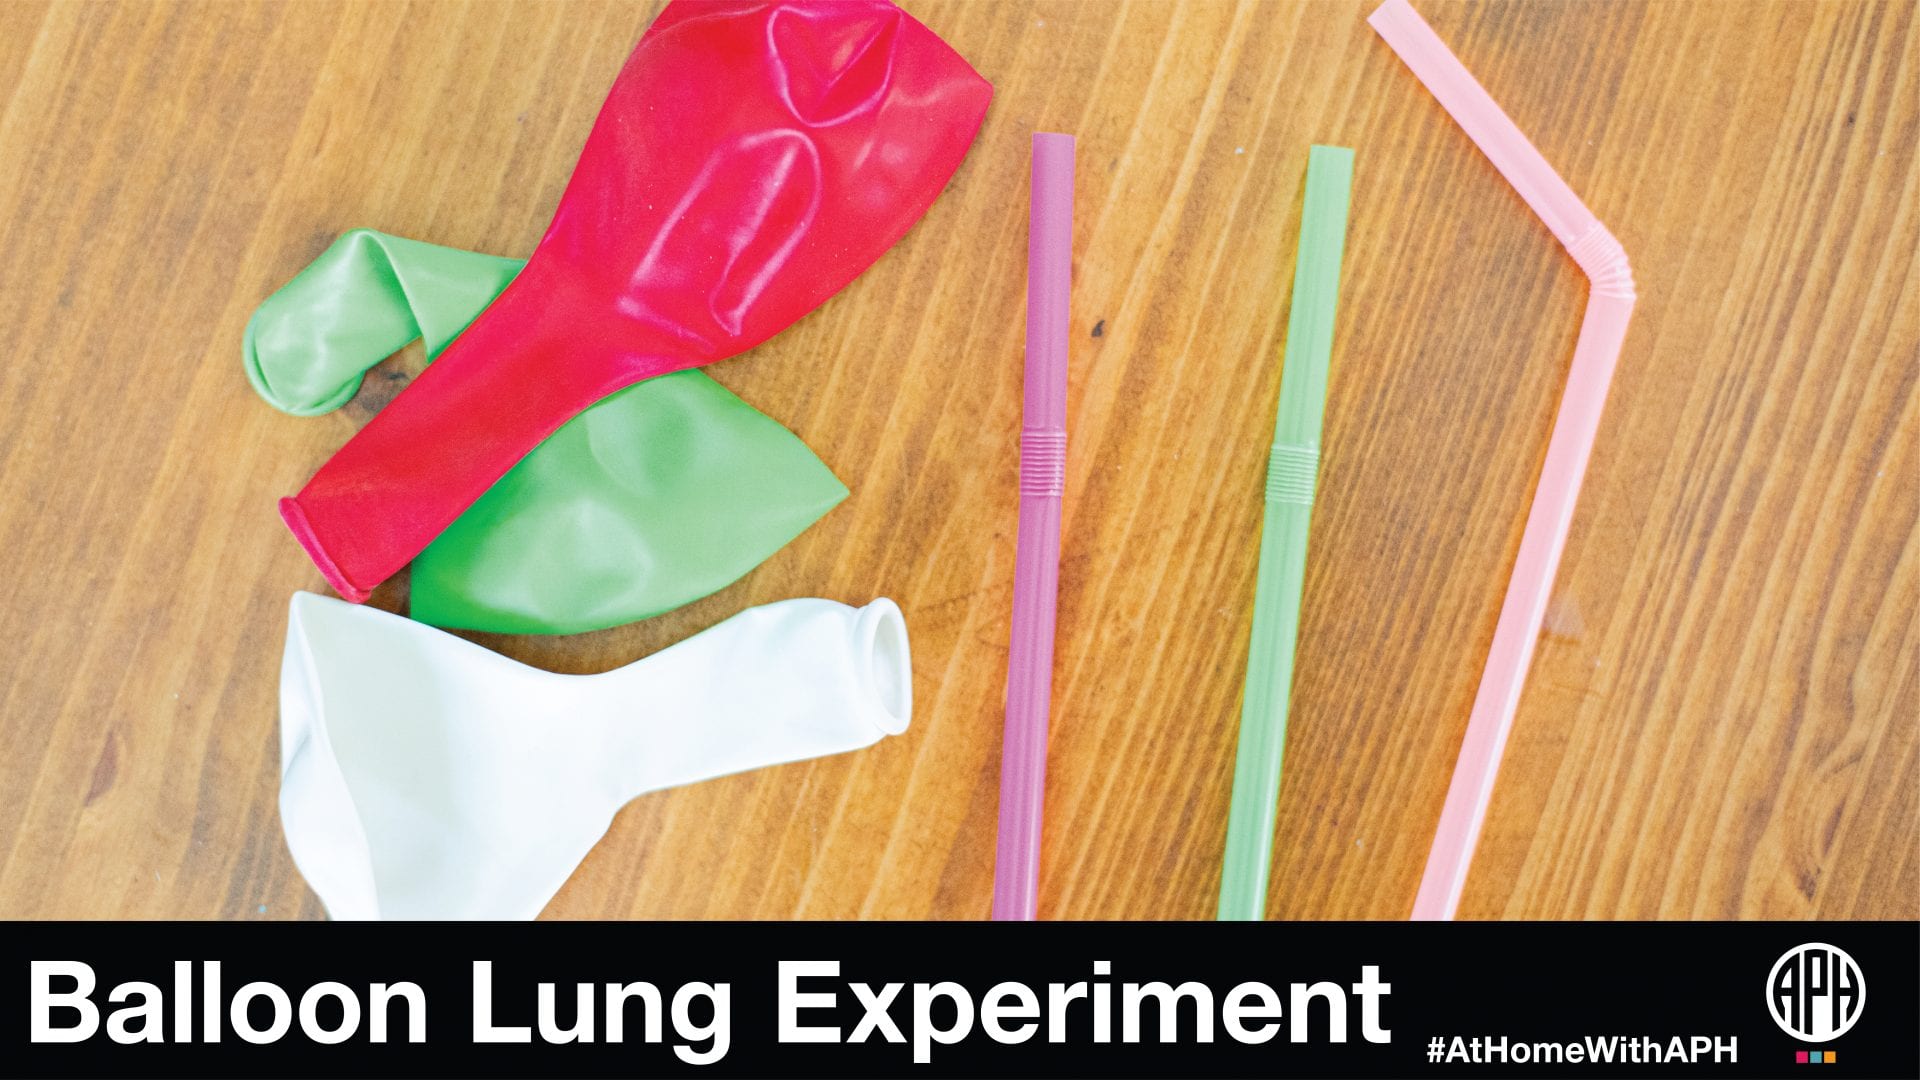 balloons and plastic straws on a table top. text reads "Balloon Lung Experiment #AtHomeWithAPH"